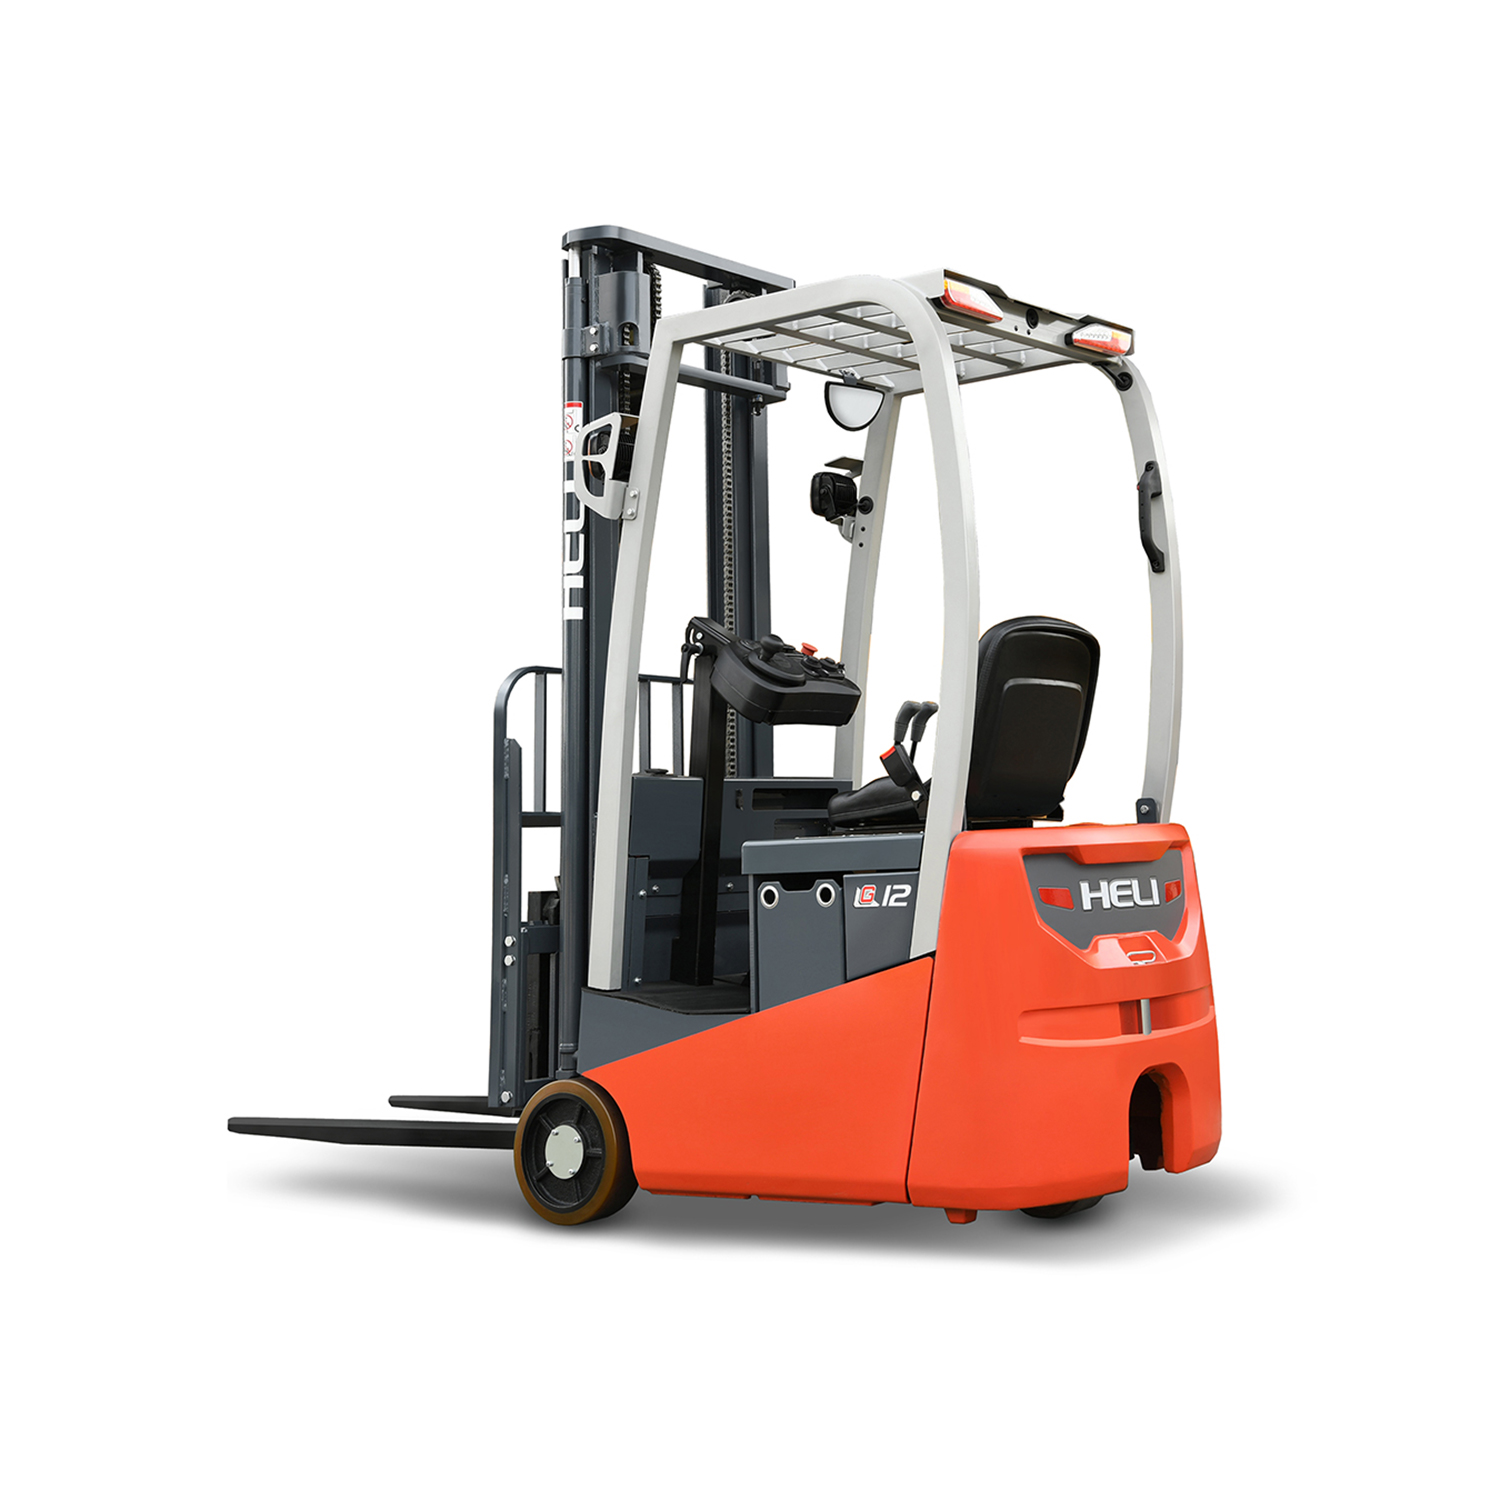 Heli 1.2 Ton Electric Forklift new